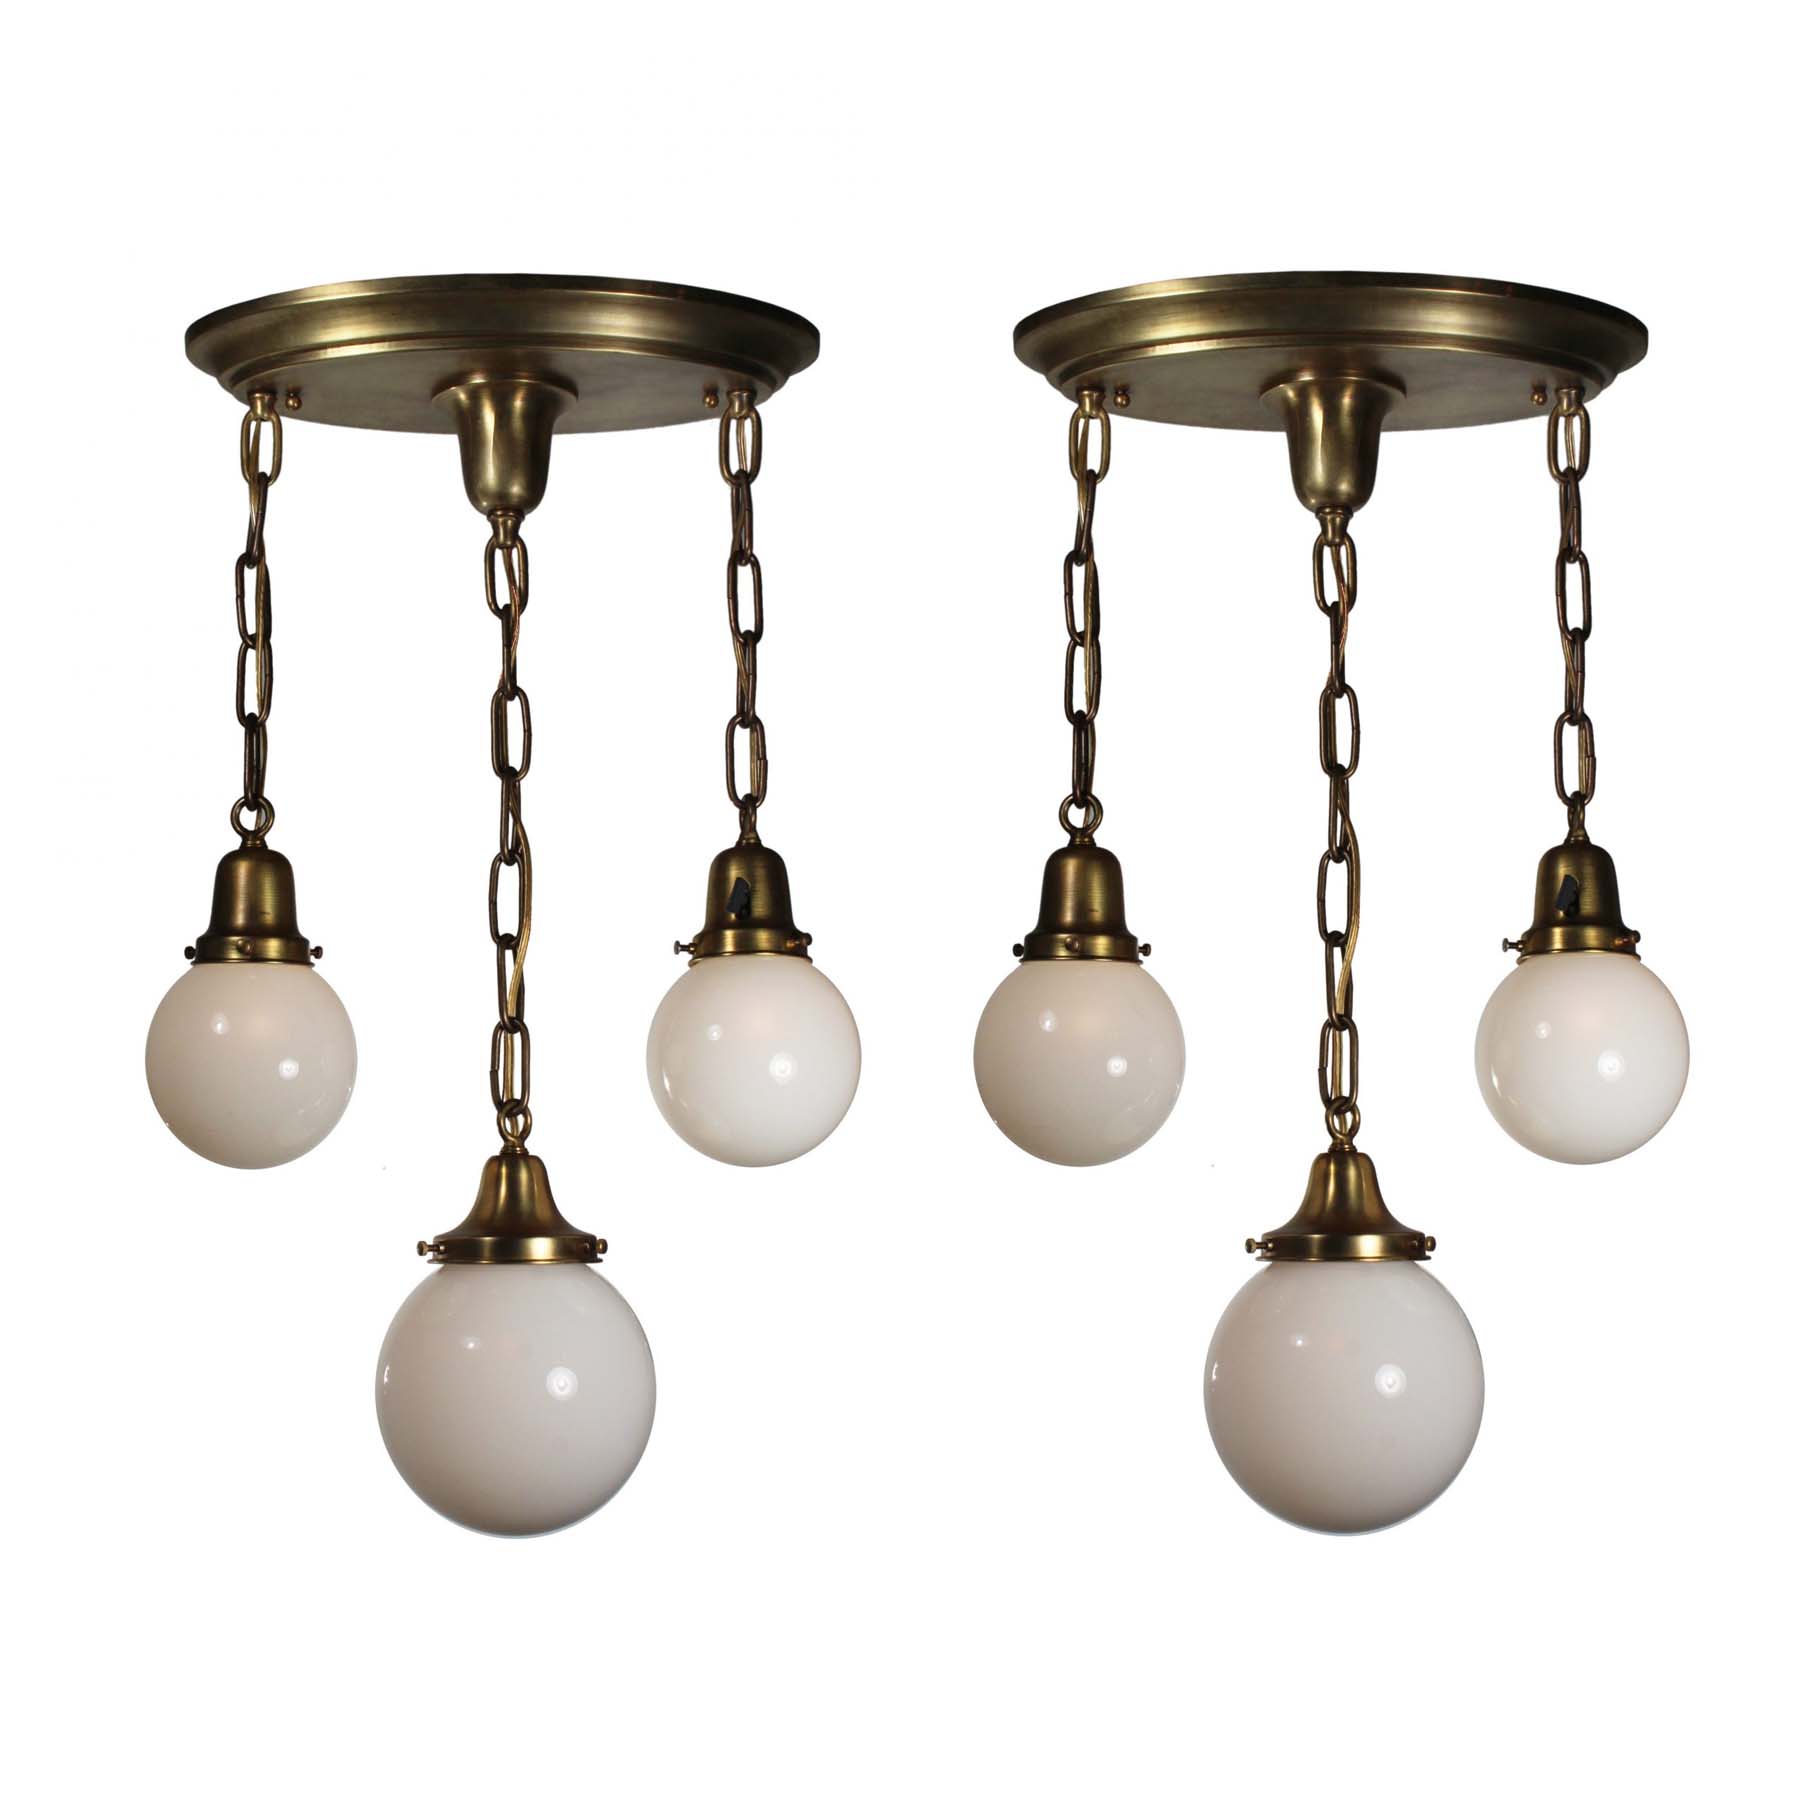 SOLD Antique Brass Semi Flush-Mount Chandelier with Ball Shades-69677